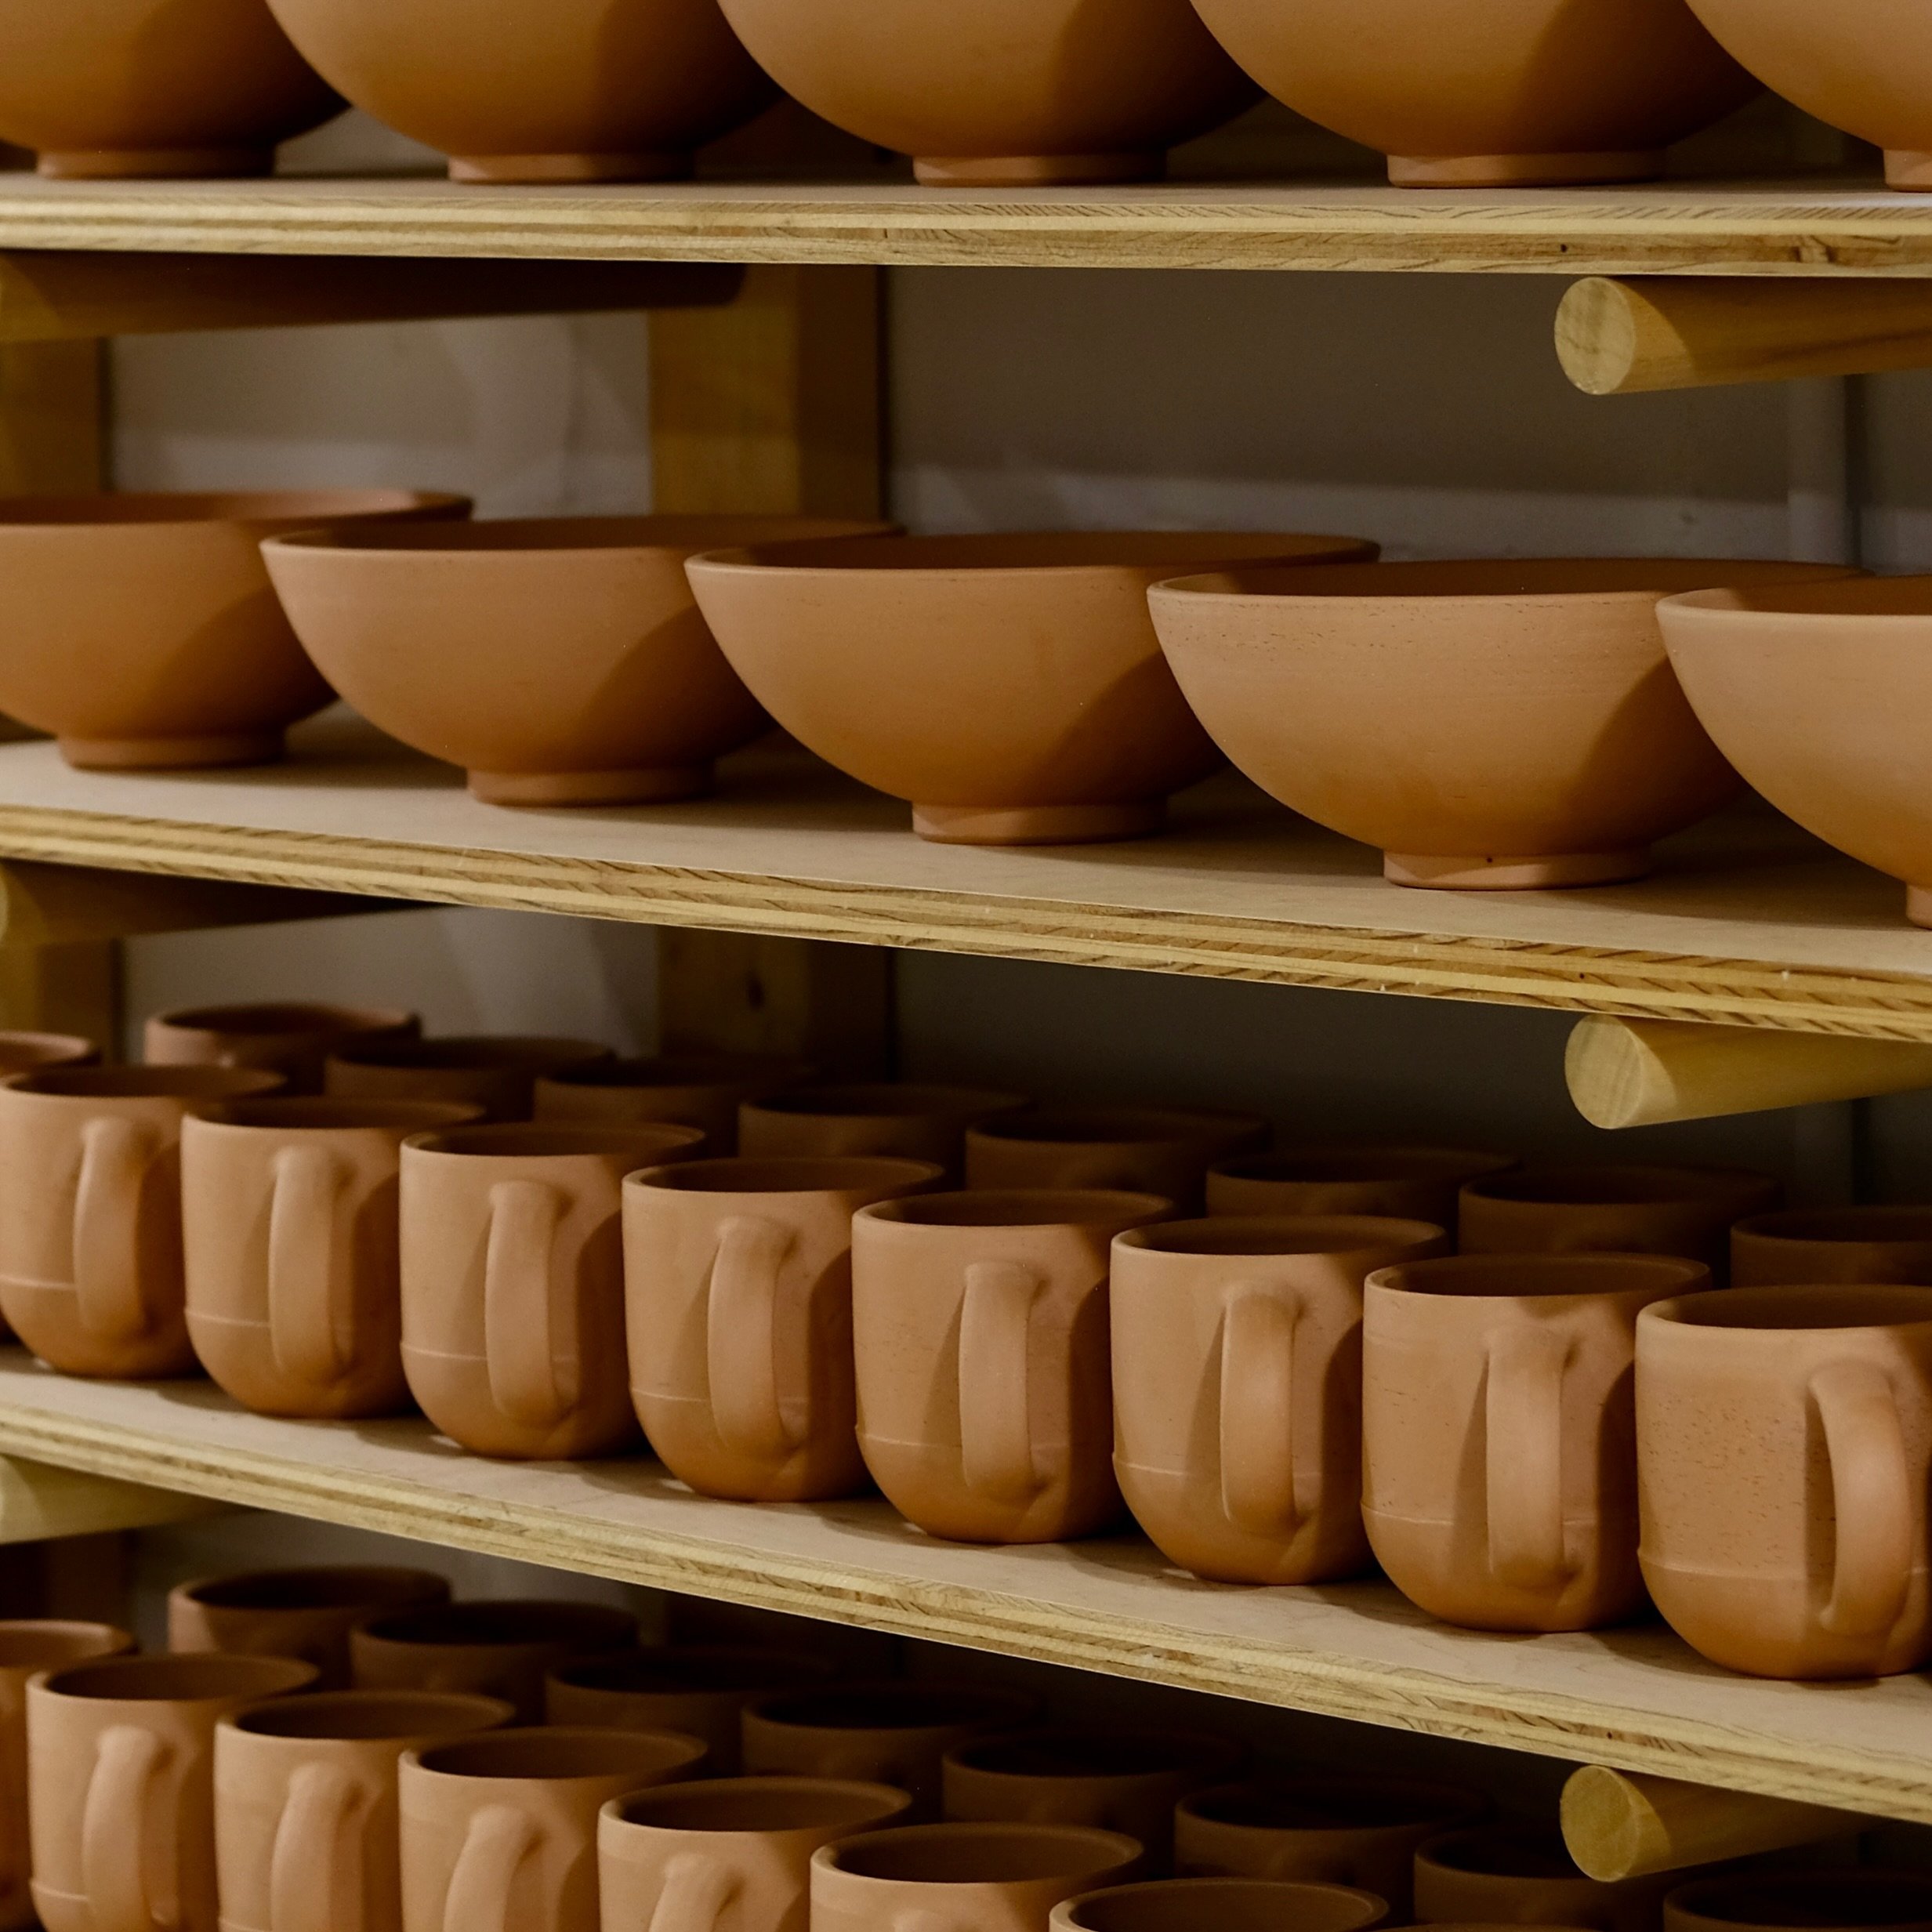 These pots are all lined up for a little glaze bath, because it&rsquo;s time for a SHOP UPDATE! Mark your calendars for next Saturday, April 27 at 12pm central time. 

There will be all the classic characters: mugs, ramen bowls, pinch bowls, and mixi